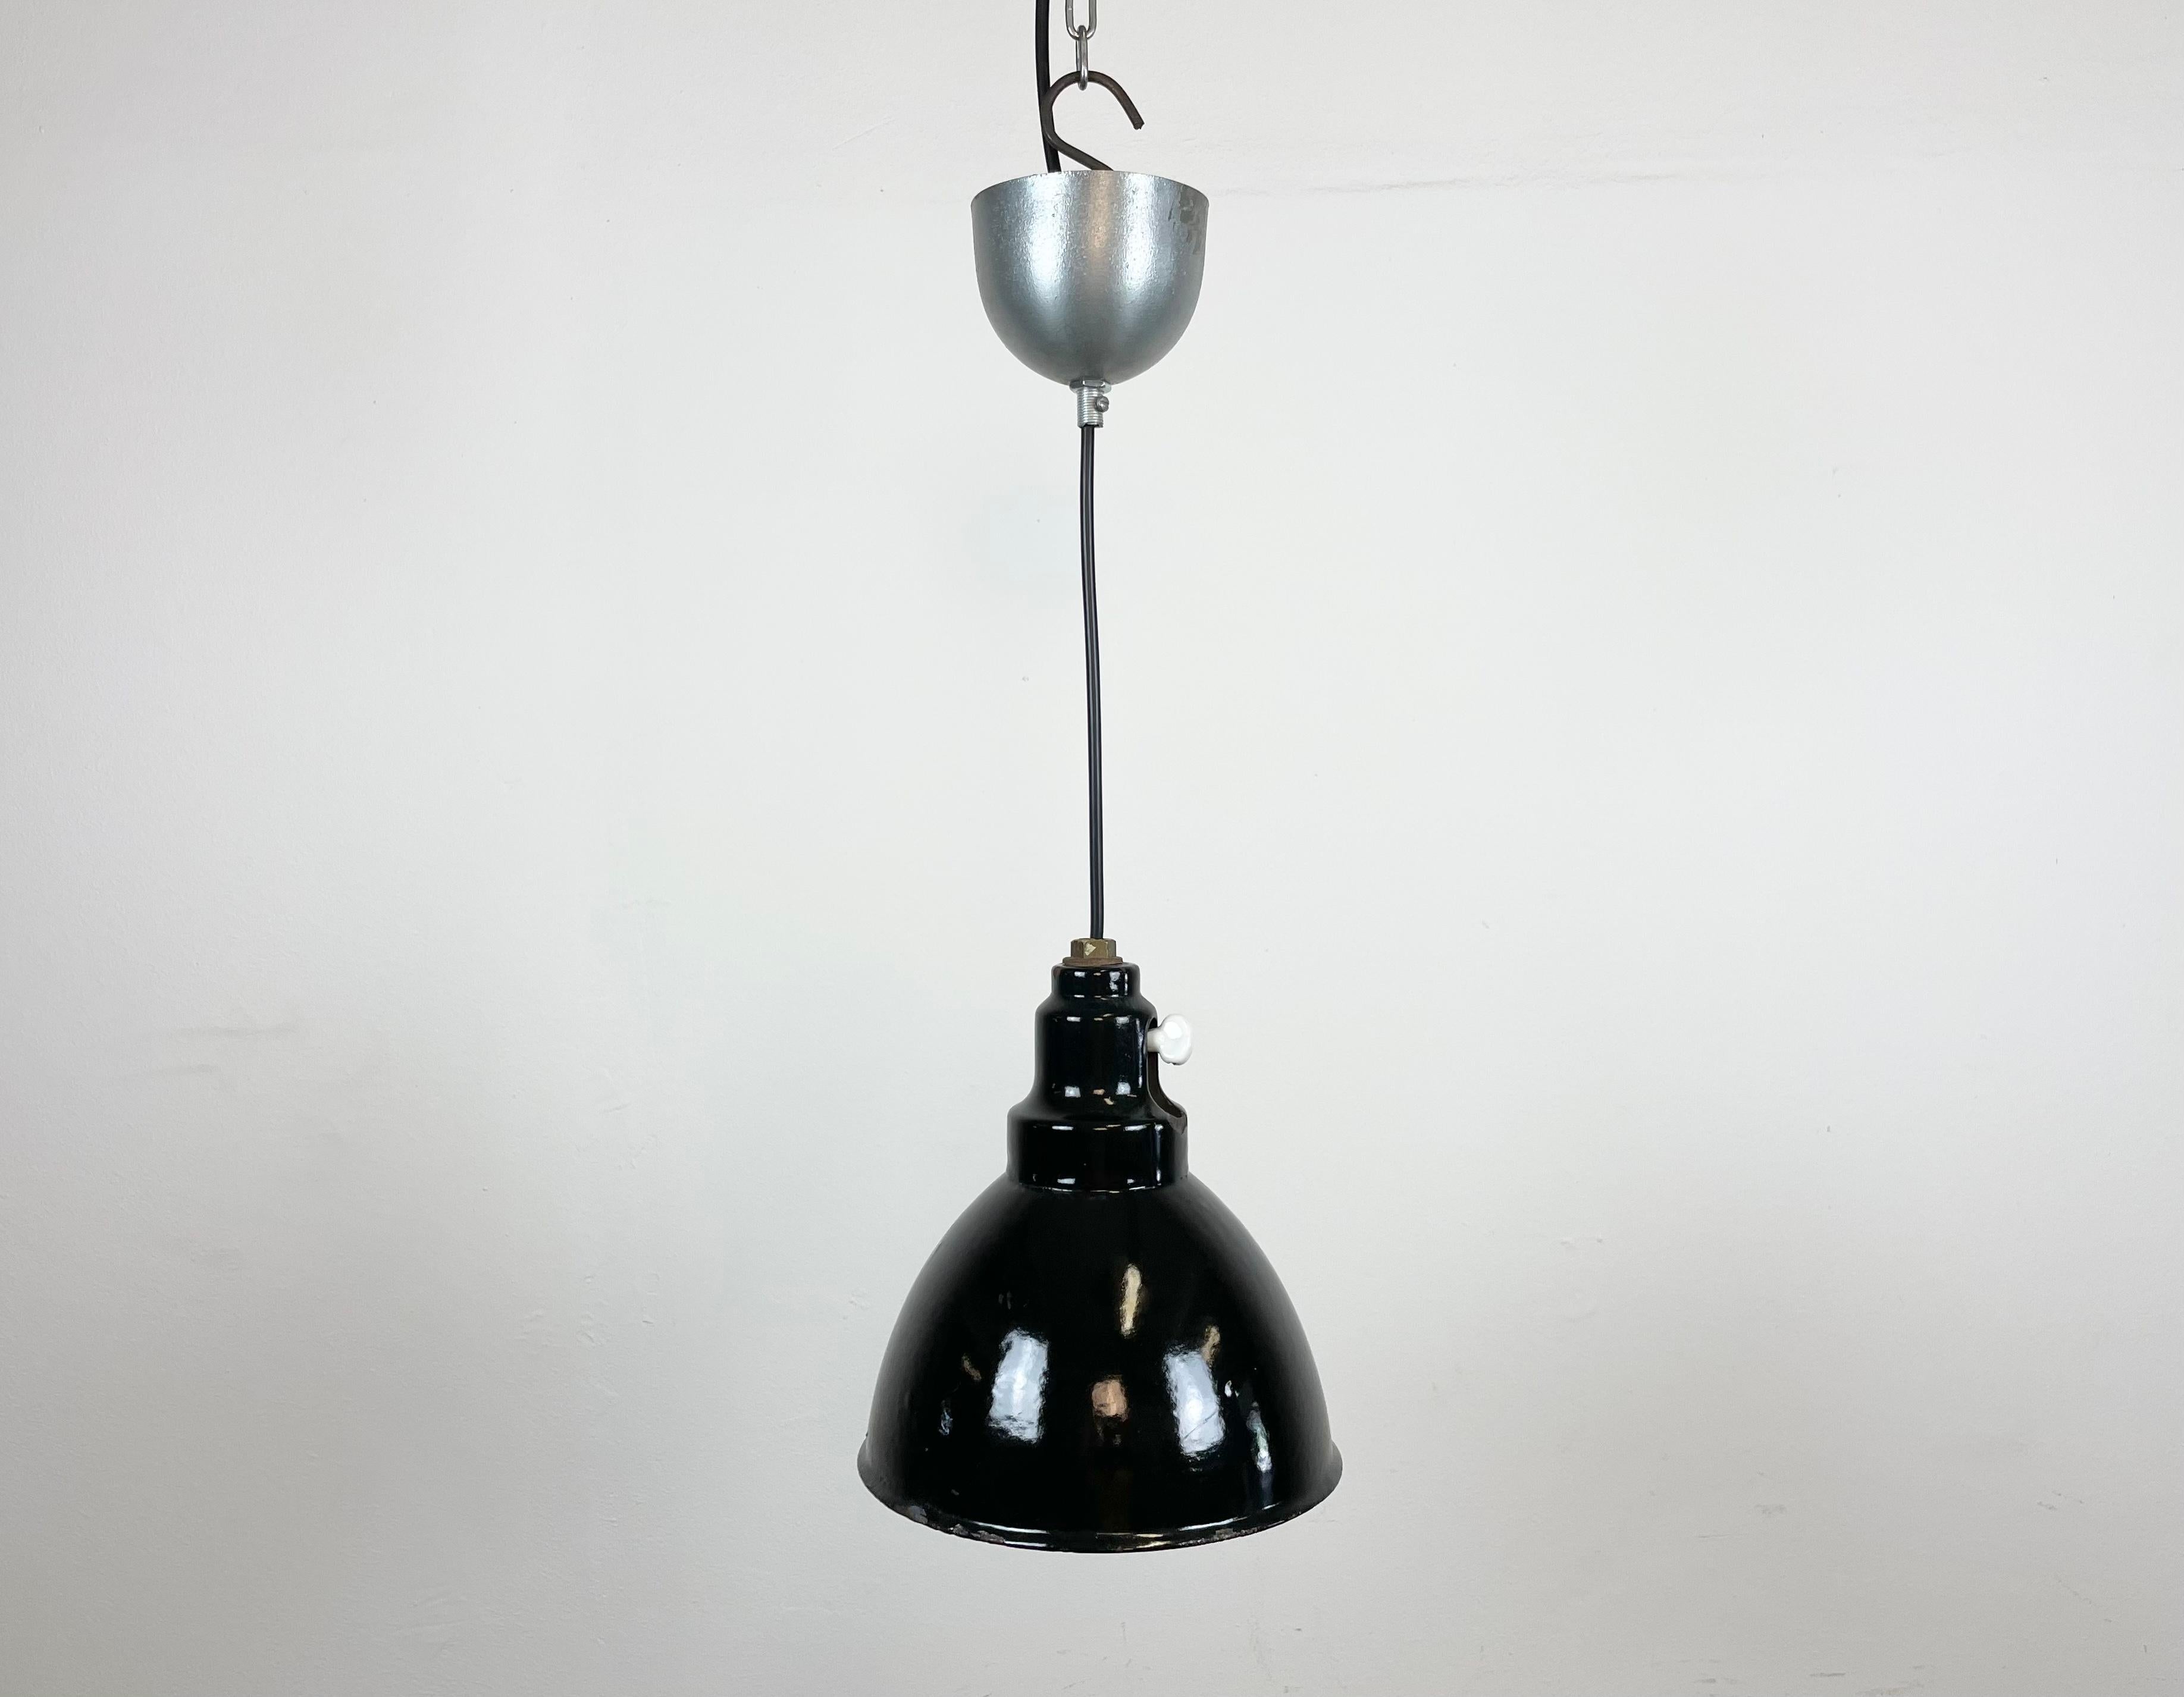 Industrial black enamel pendant light made in former Czechosloivakia during the 1950s. White enamel inside the shade. Metal celing canopy. The original socket with switch requires E 27/ E 26 light bulbs. New wire. Fully functional. The weight of the